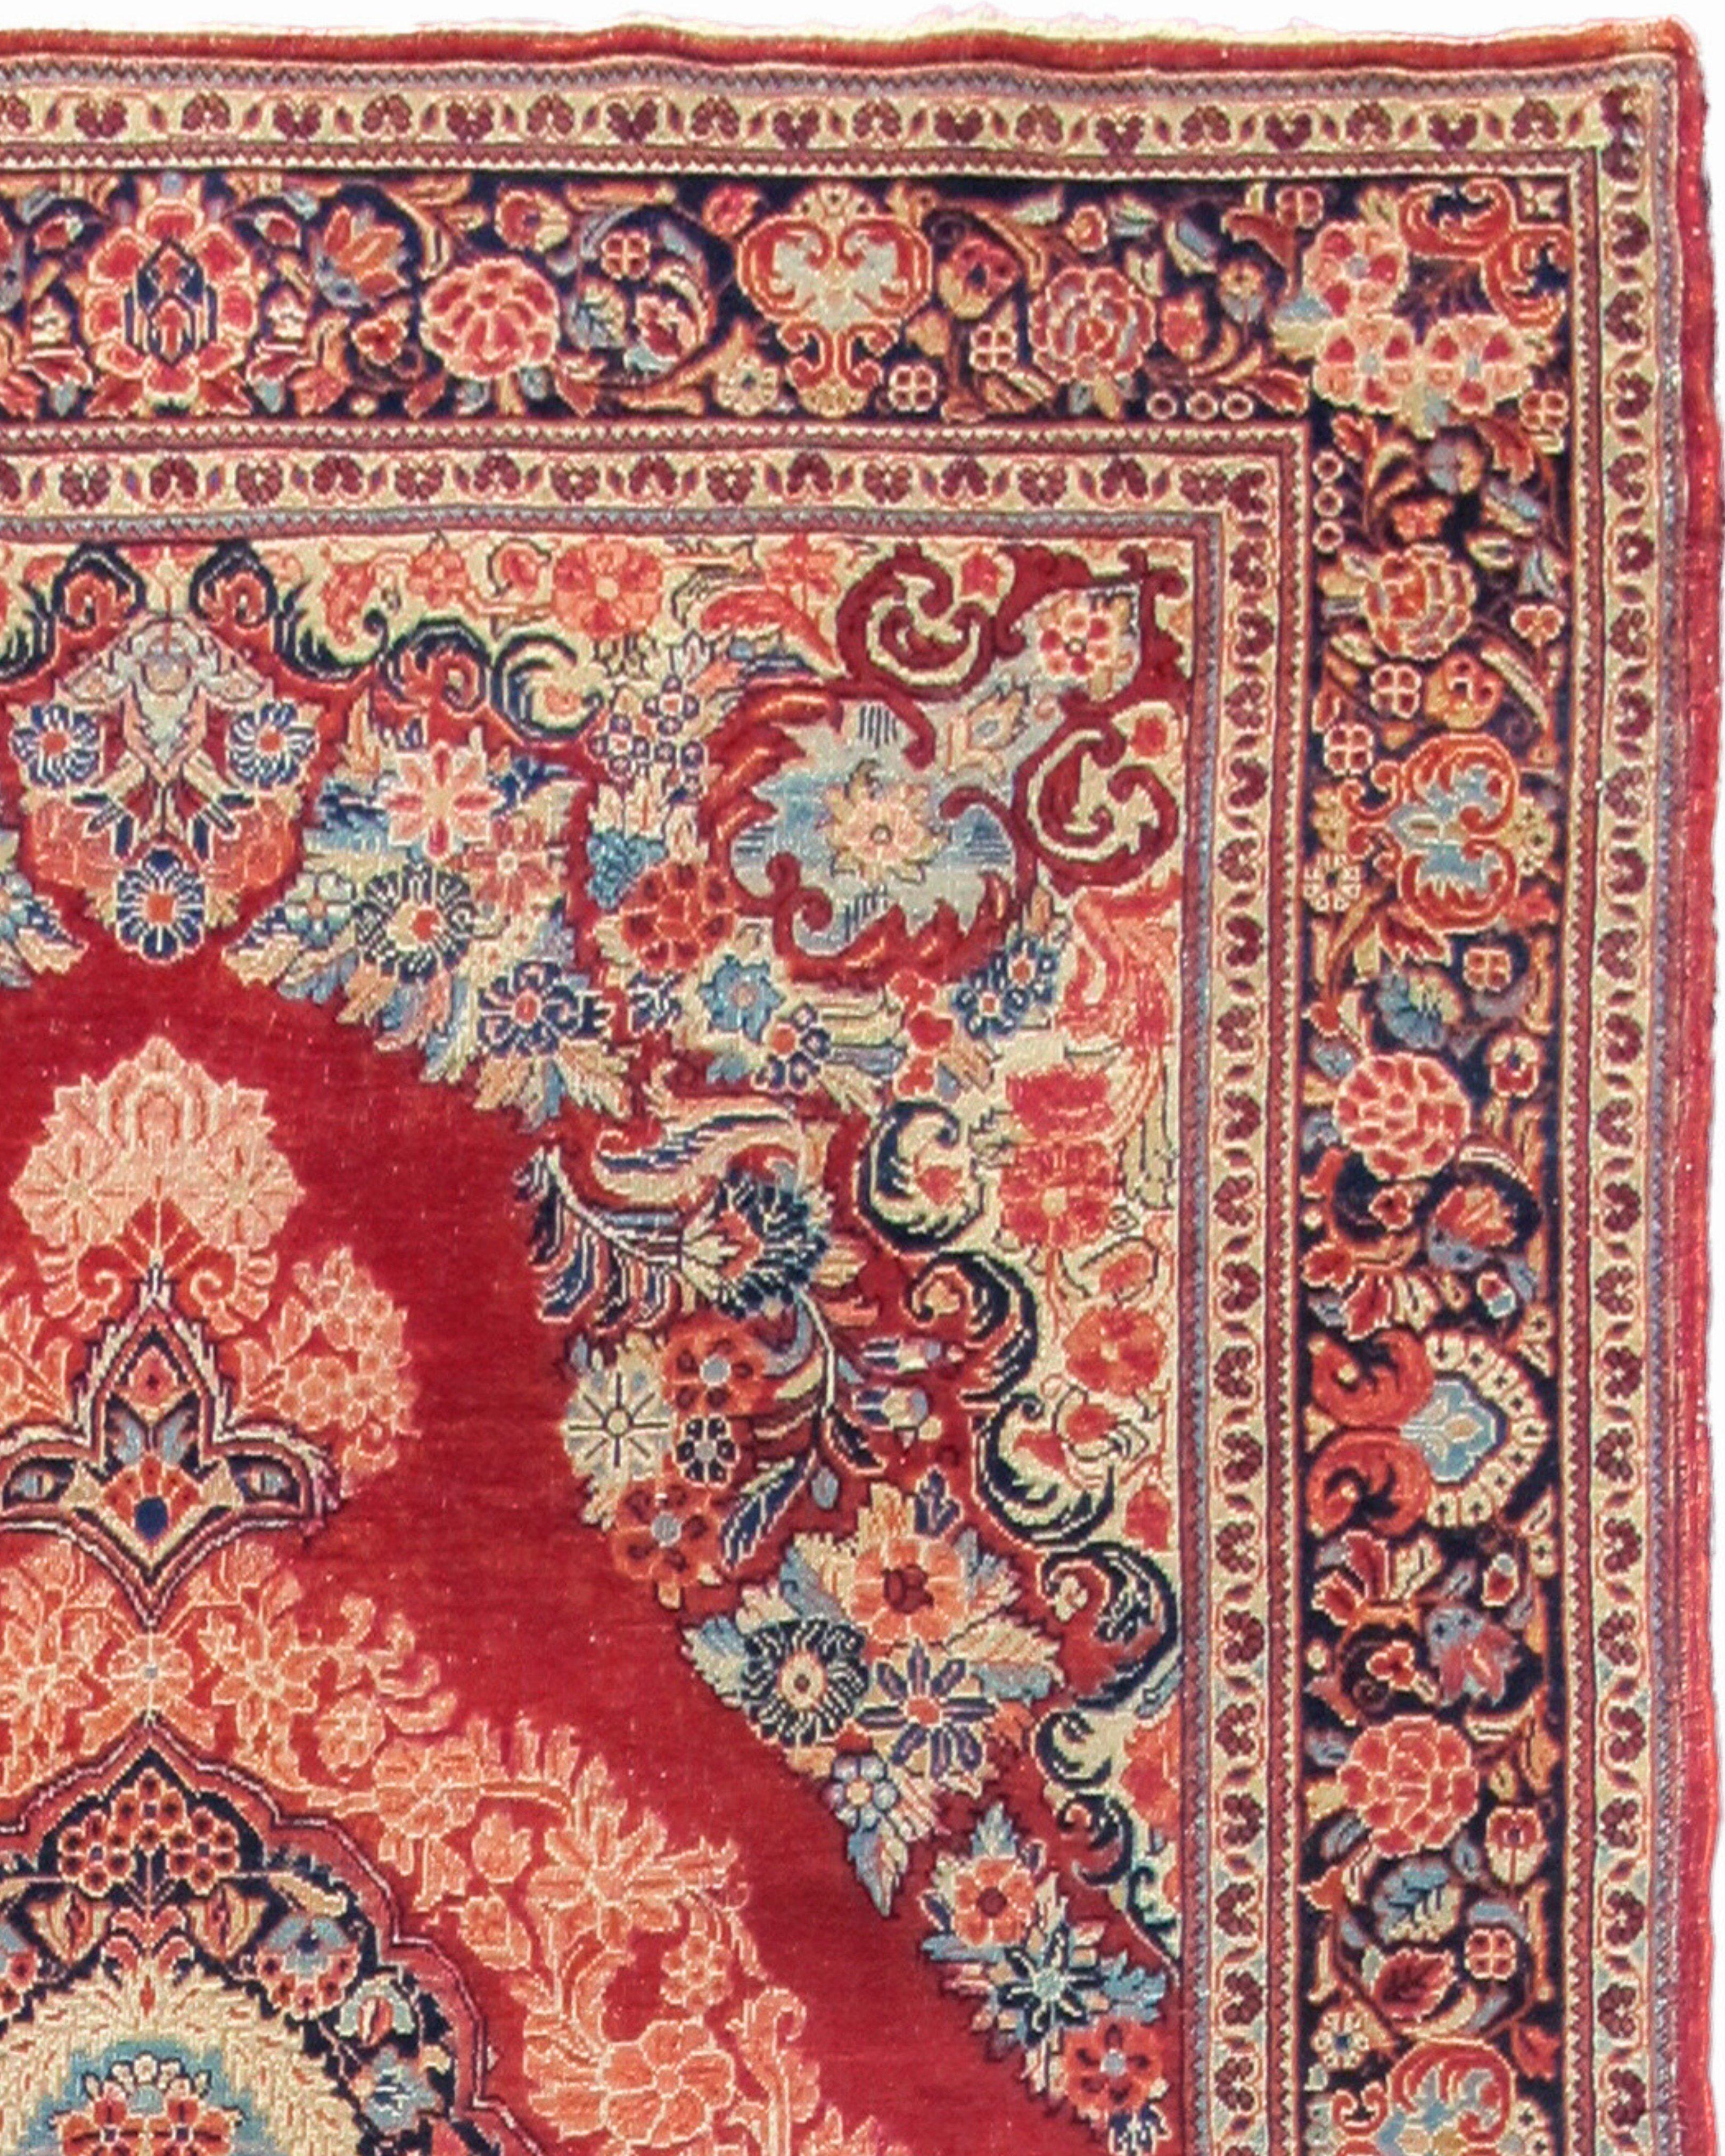 Antique Persian Sarouk Rug, Early 20th Century

Additional Information:
Dimensions: 6'8